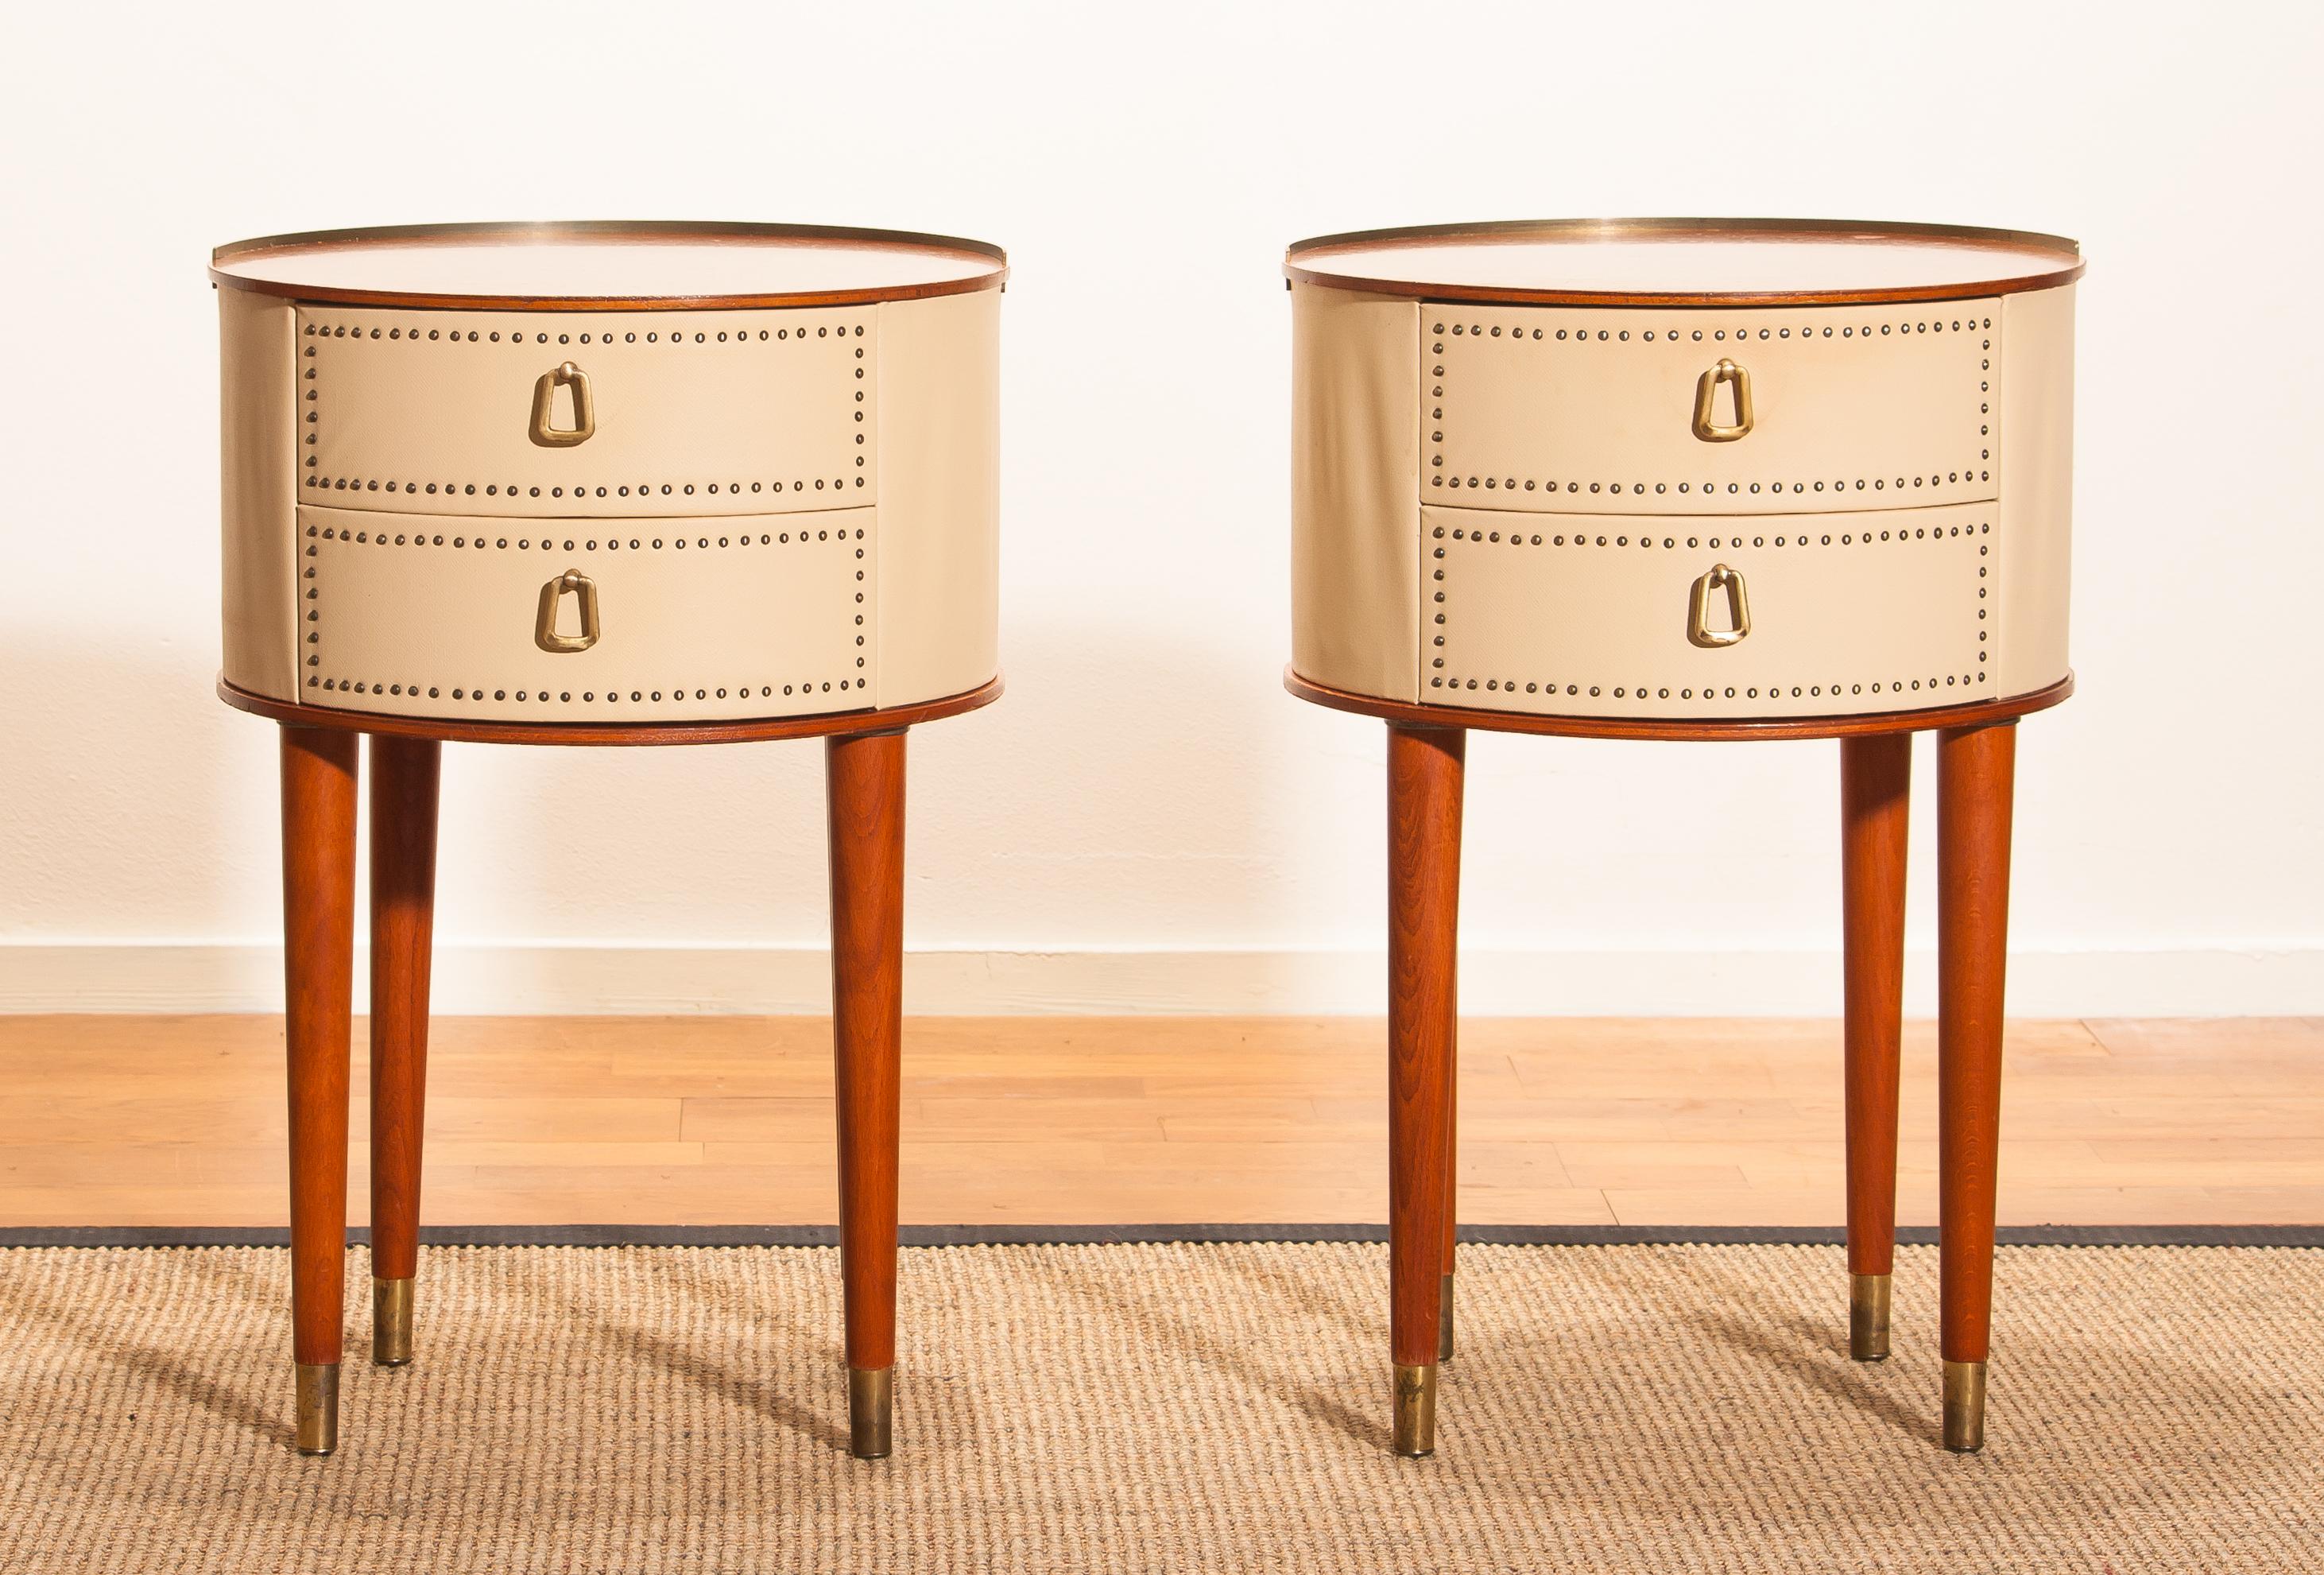 1950s, Bedside Tables in Mahogany and Brass by Halvdan Pettersson, Tibro, Sweden 1